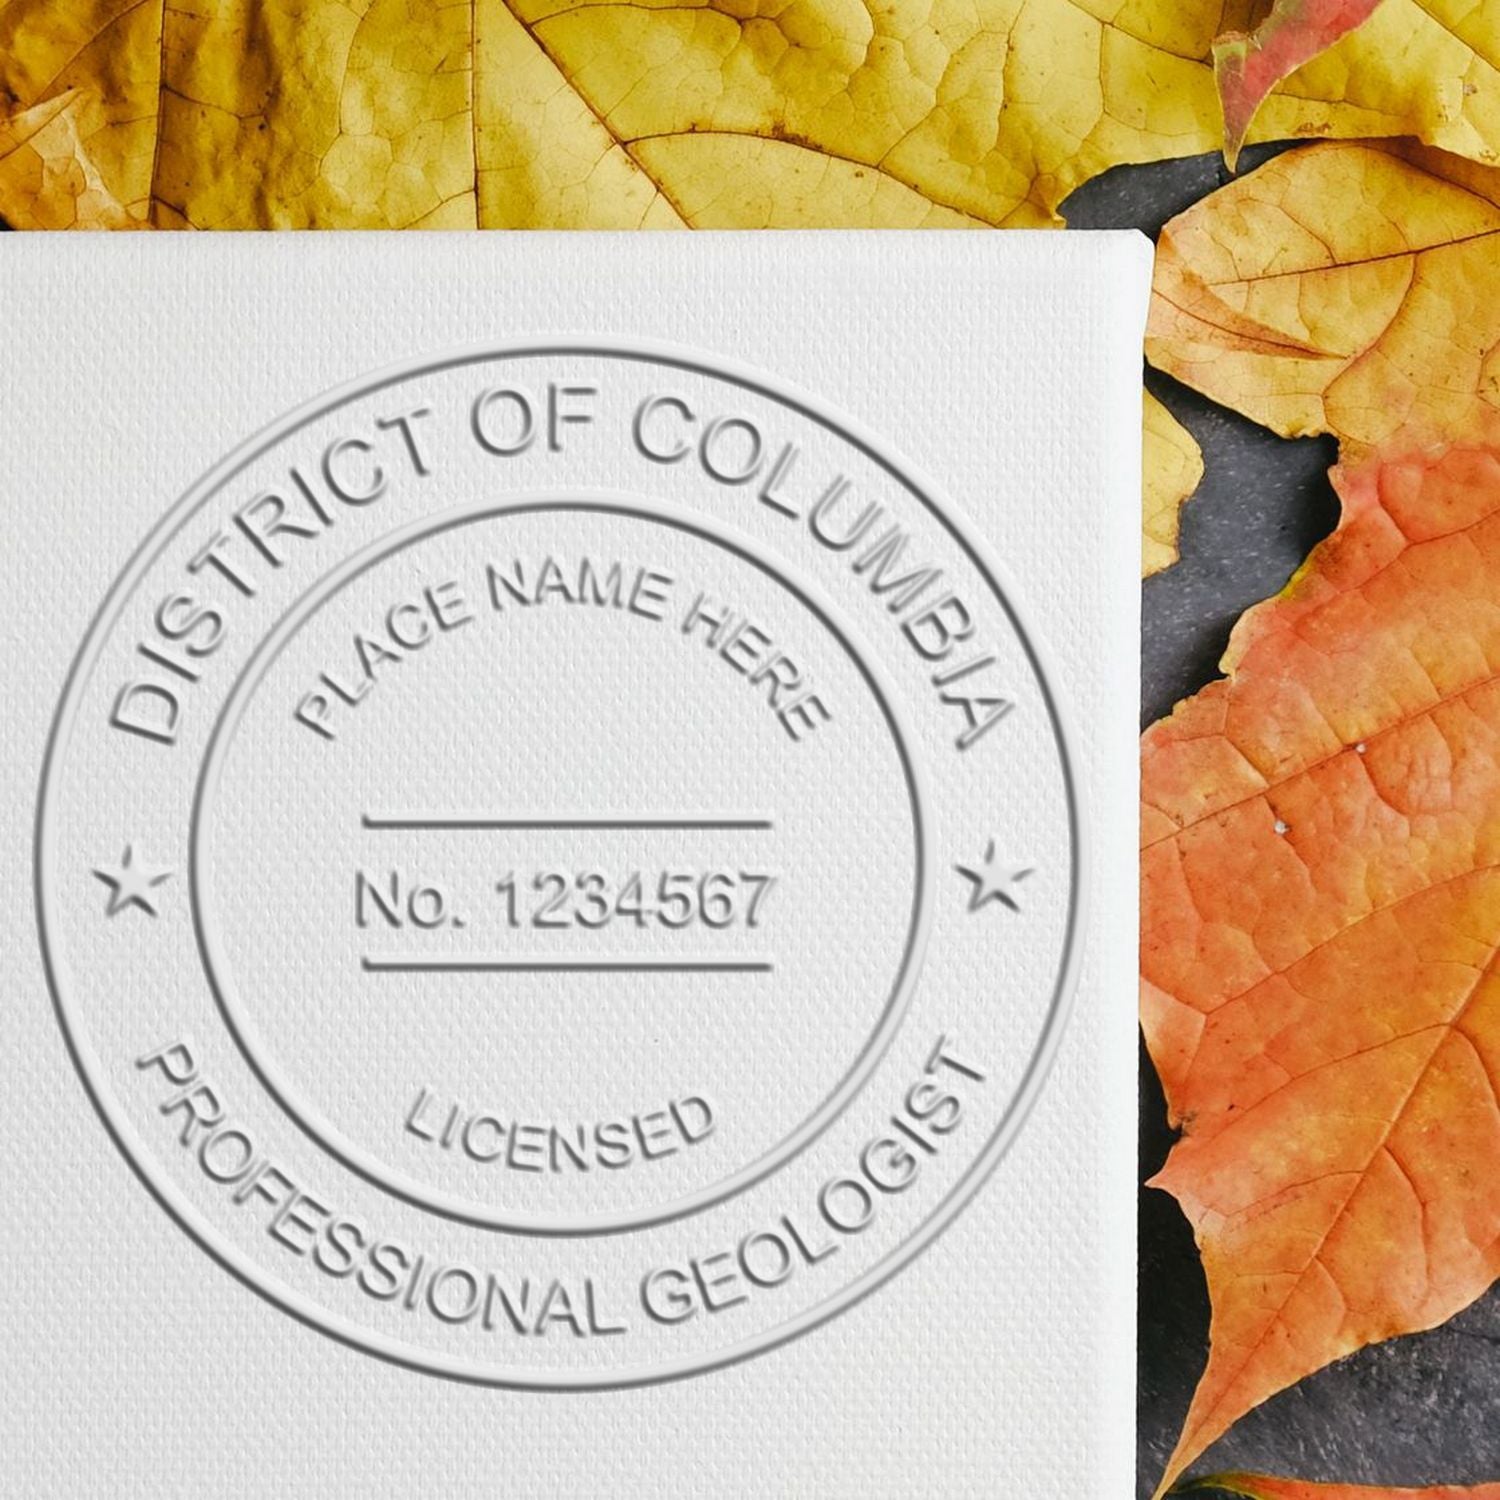 The main image for the State of District of Columbia Extended Long Reach Geologist Seal depicting a sample of the imprint and imprint sample